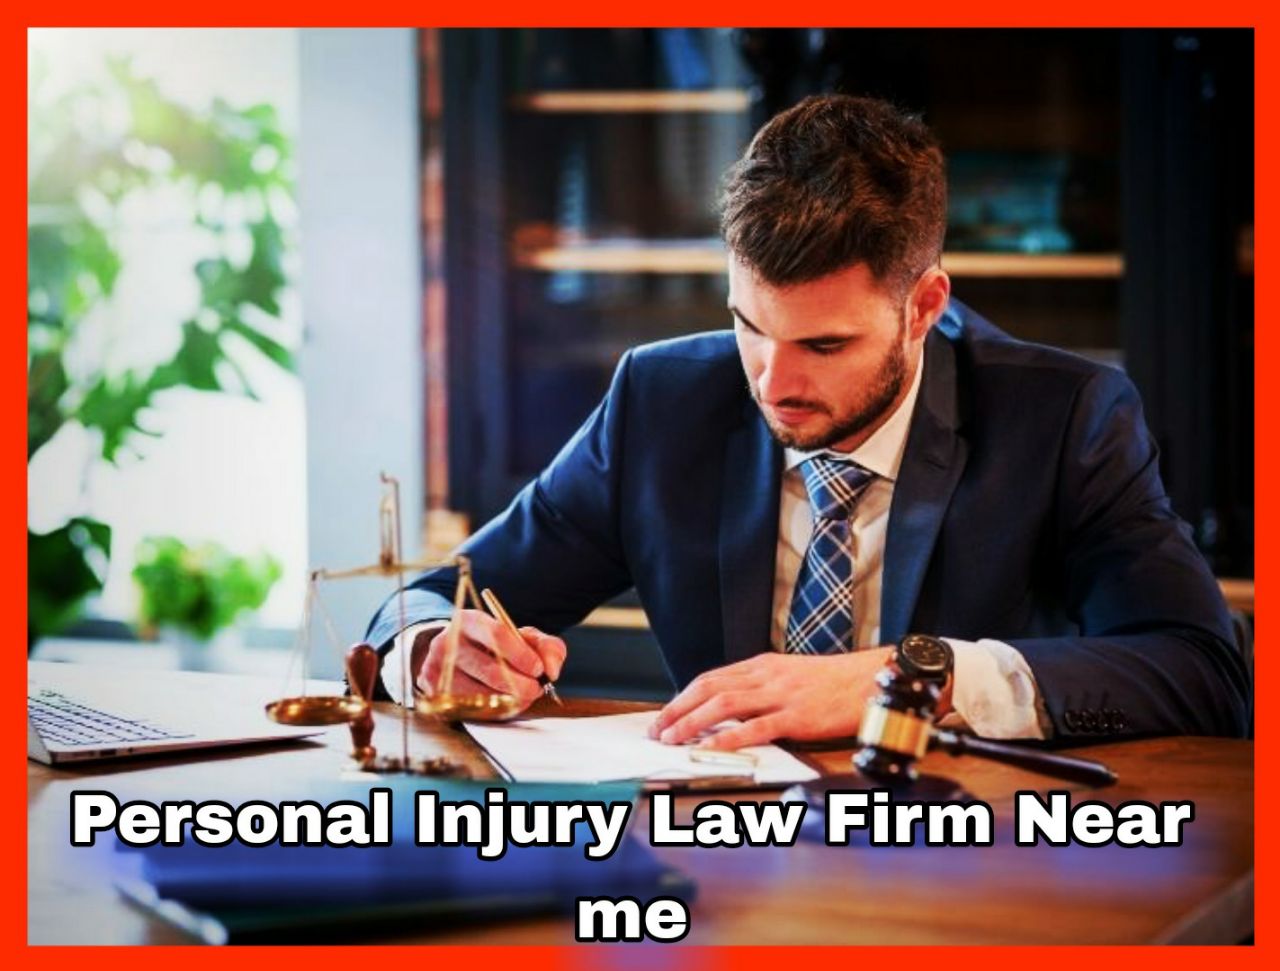 Personal Injury Law Firm Near Me - Legal Experts in Your Area